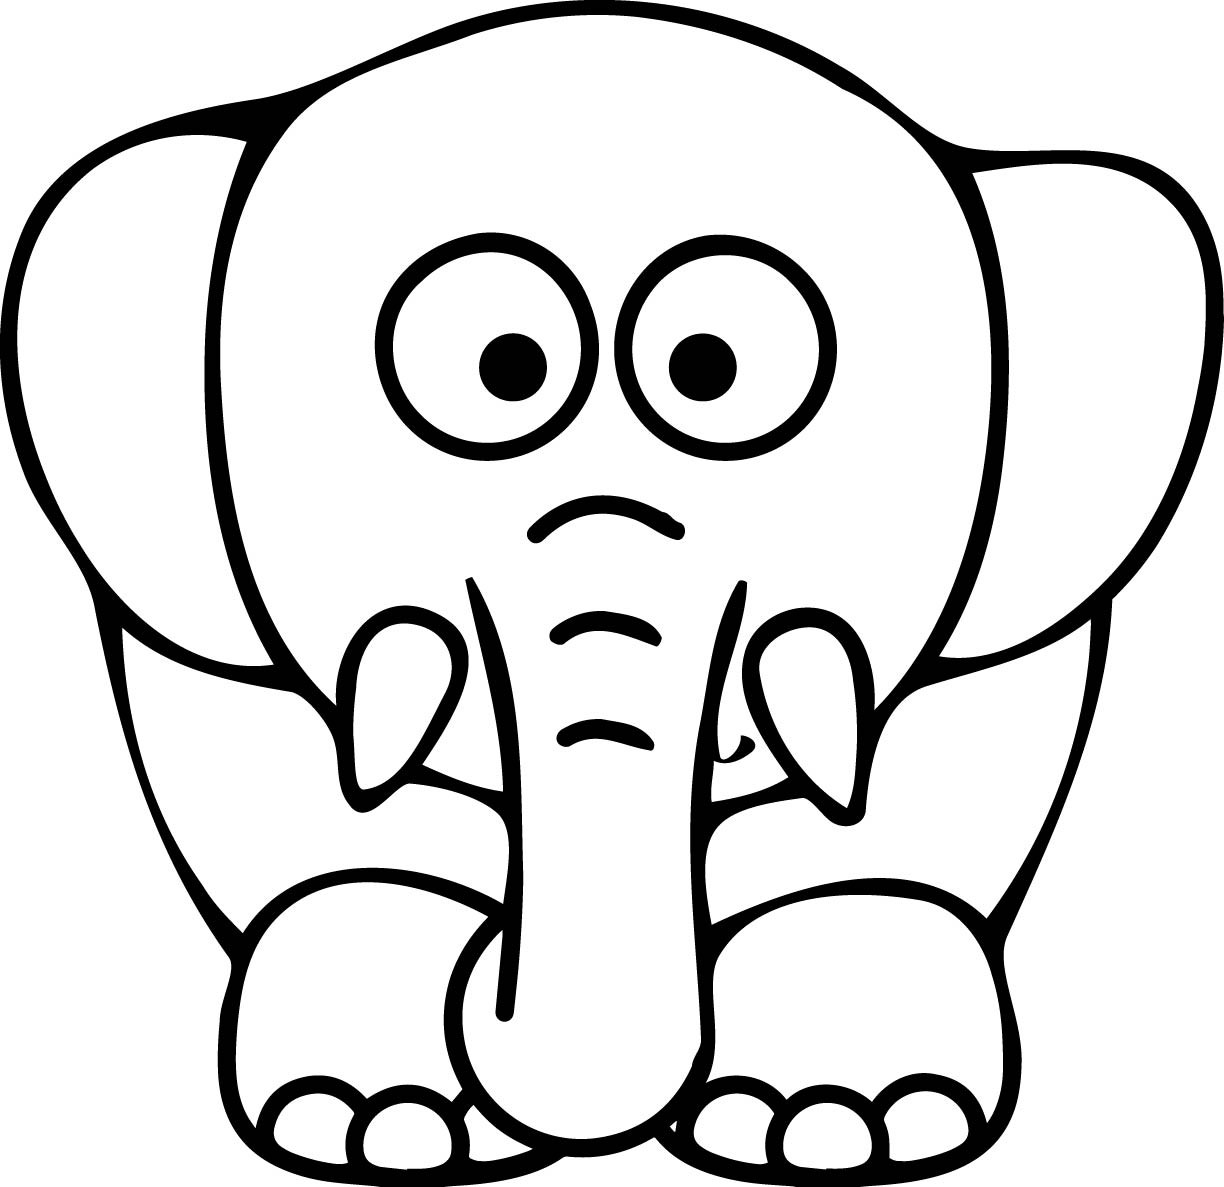 Coloring Pages Of Elephants
 Black beauty 18 Elephant coloring pages